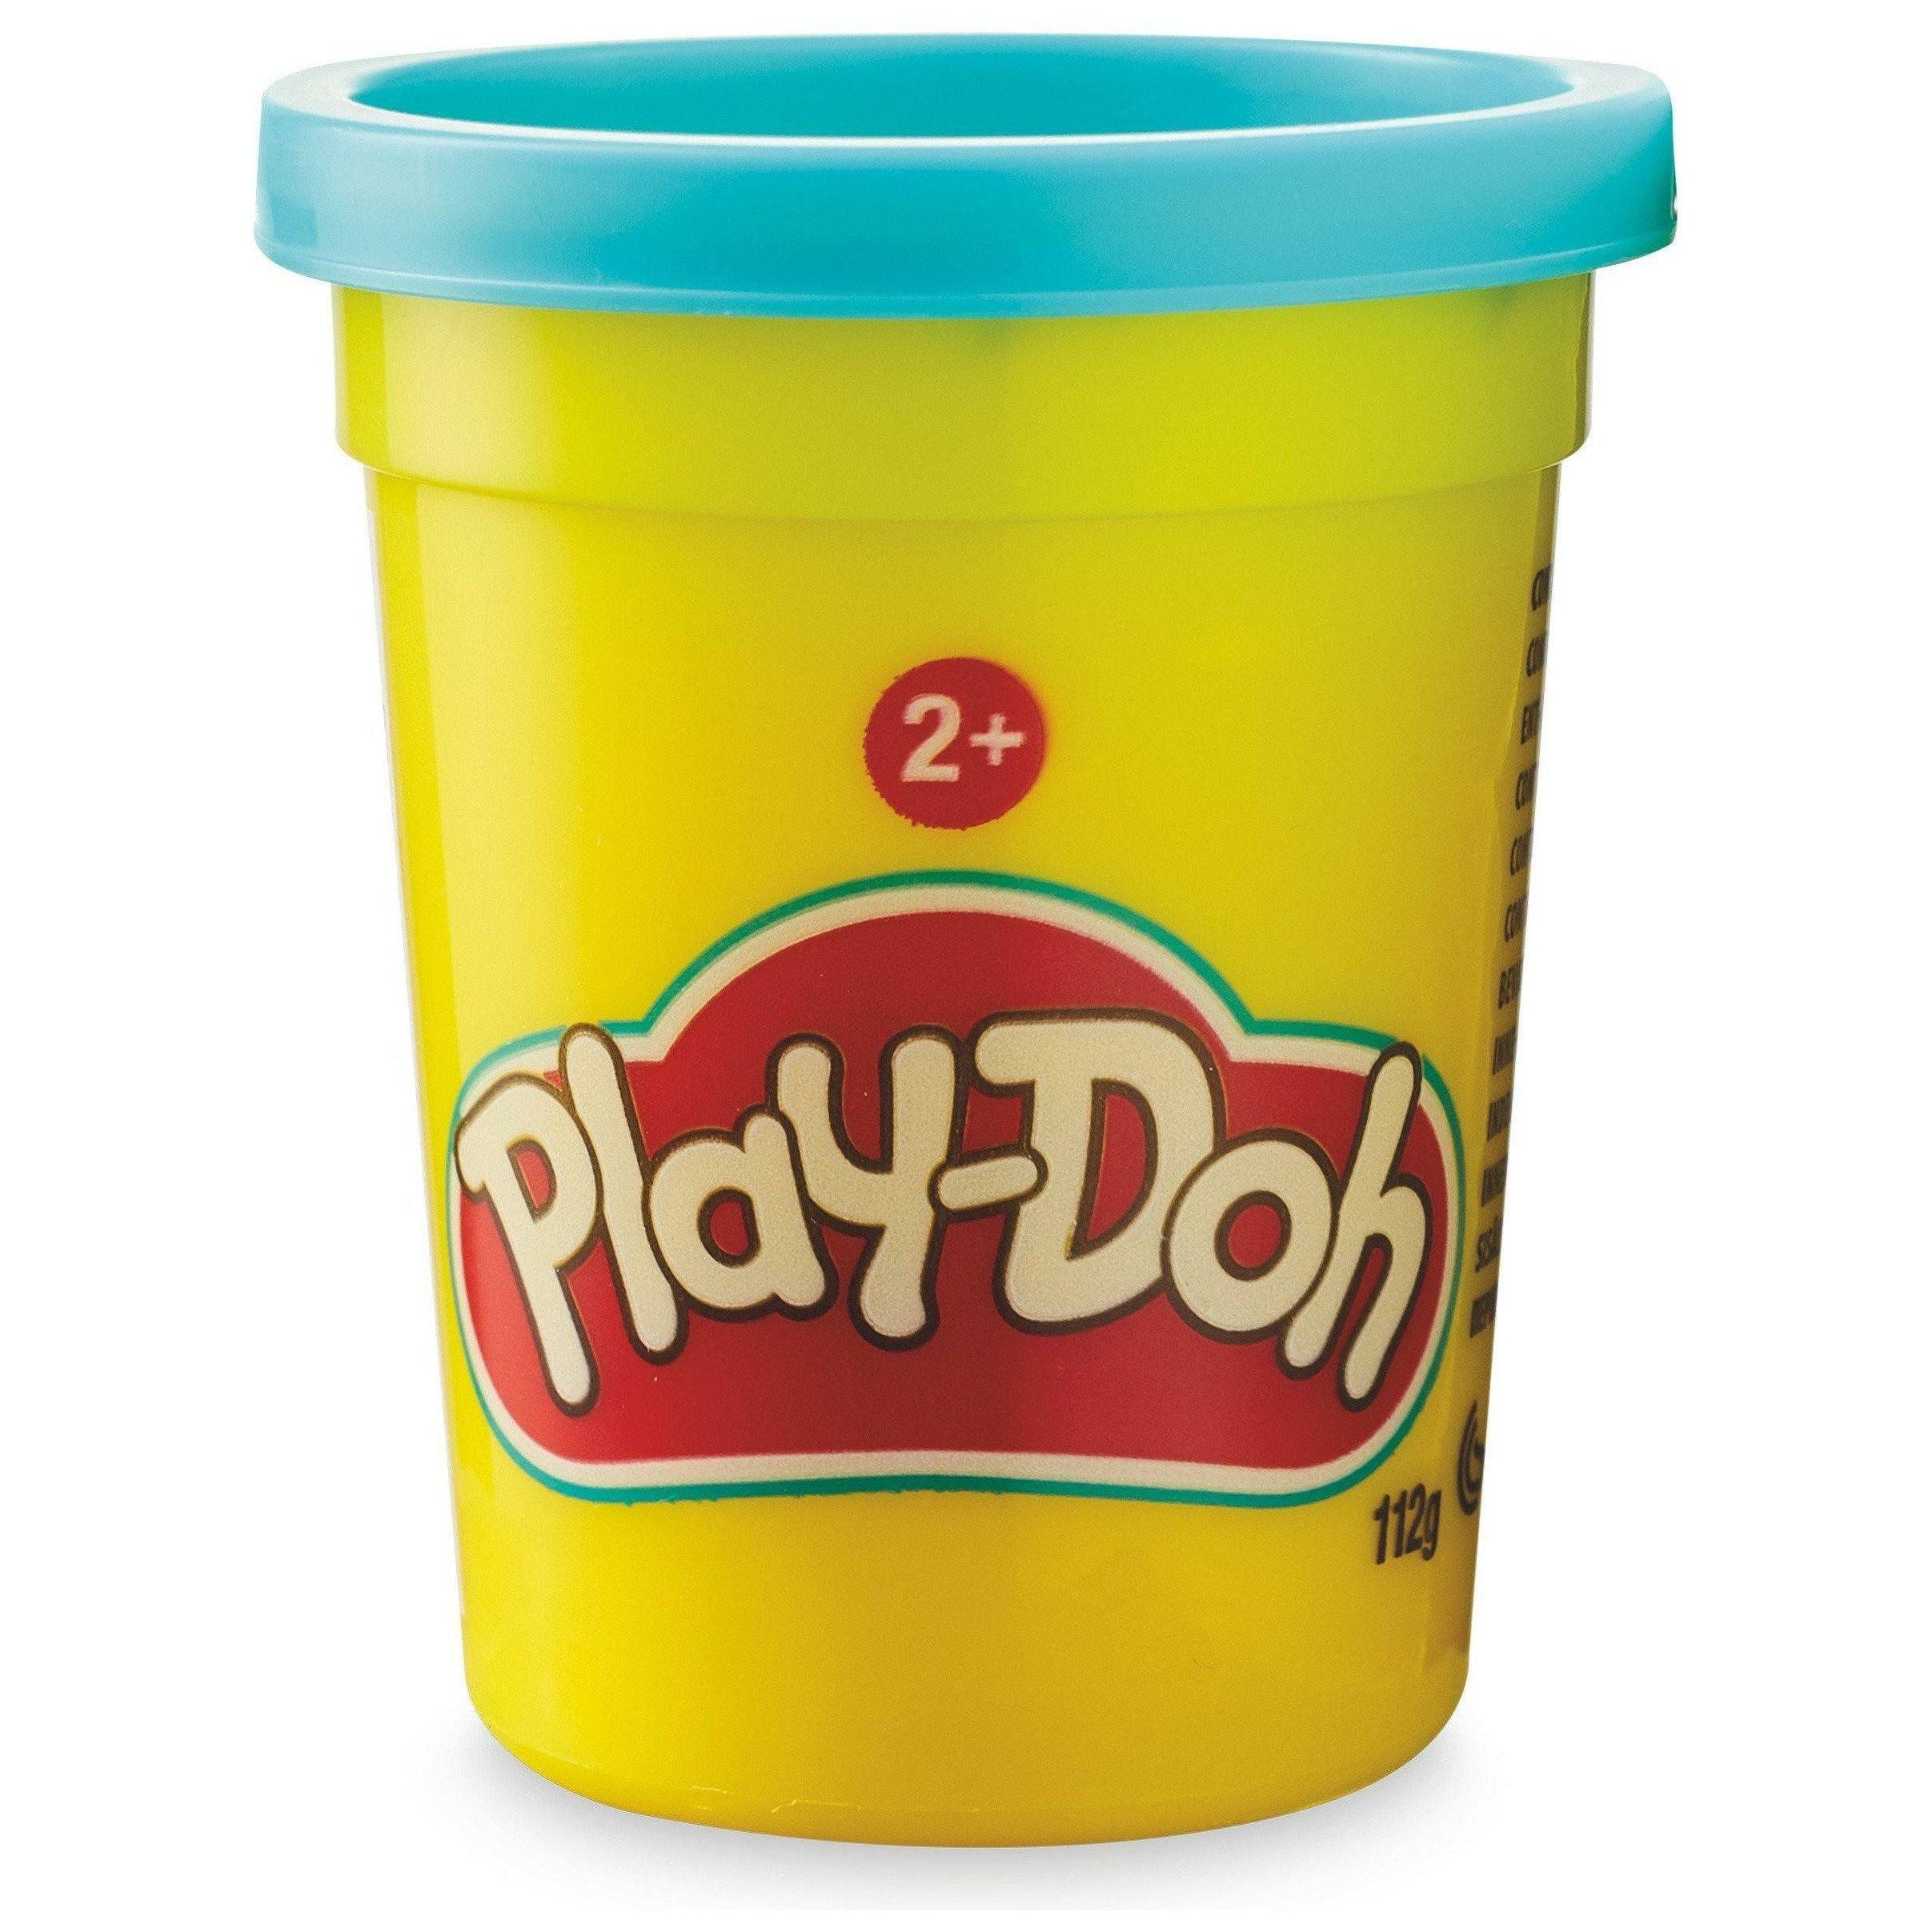 Hasbro Play-Doh Single Can 112g - Blue - BumbleToys - 2-4 Years, 5-7 Years, Boys, Eagle Plus, Girls, Learning Toys, Make & Create